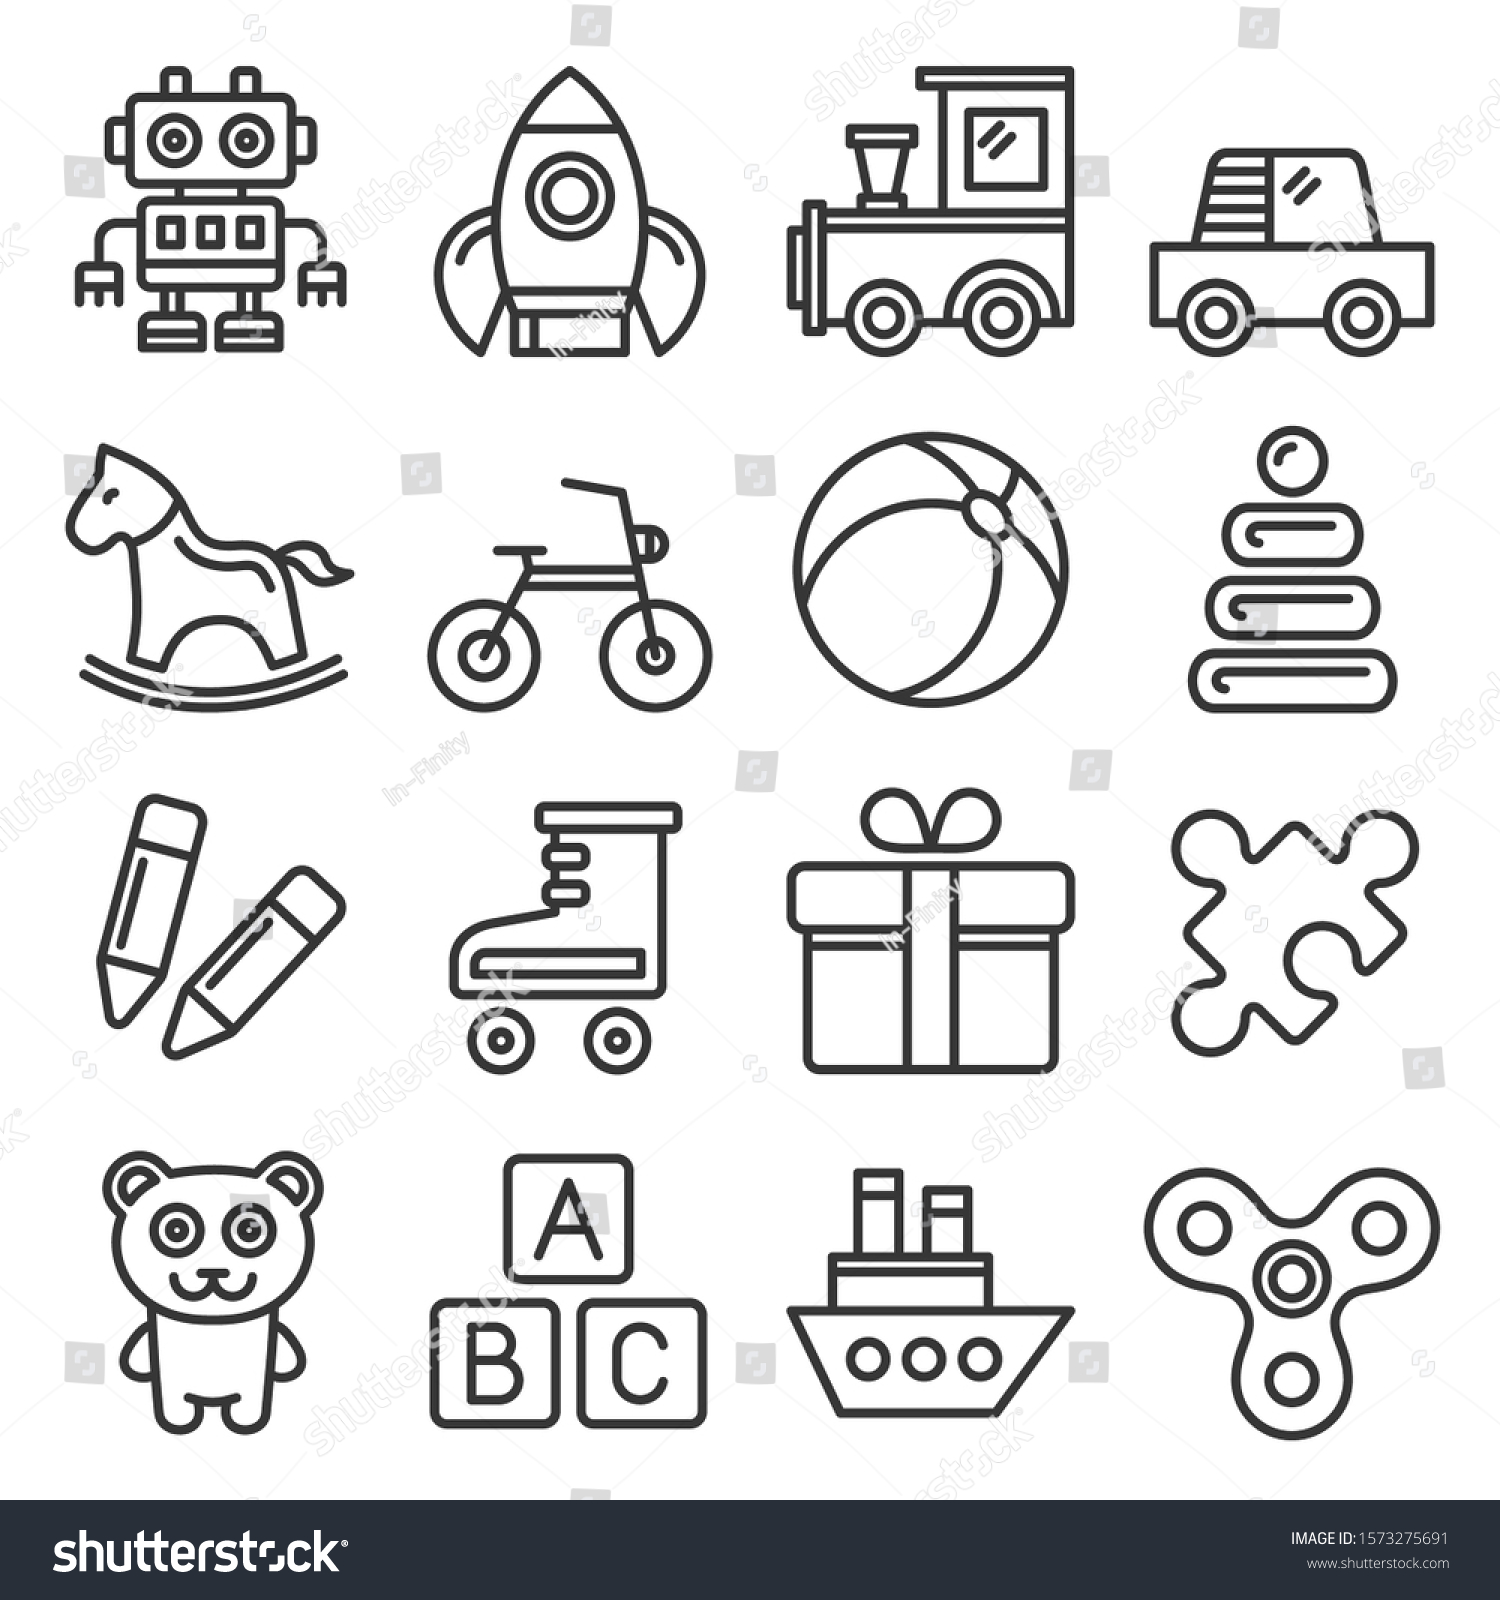 Toys Icons Set on White Background. Line Style Vector #1573275691